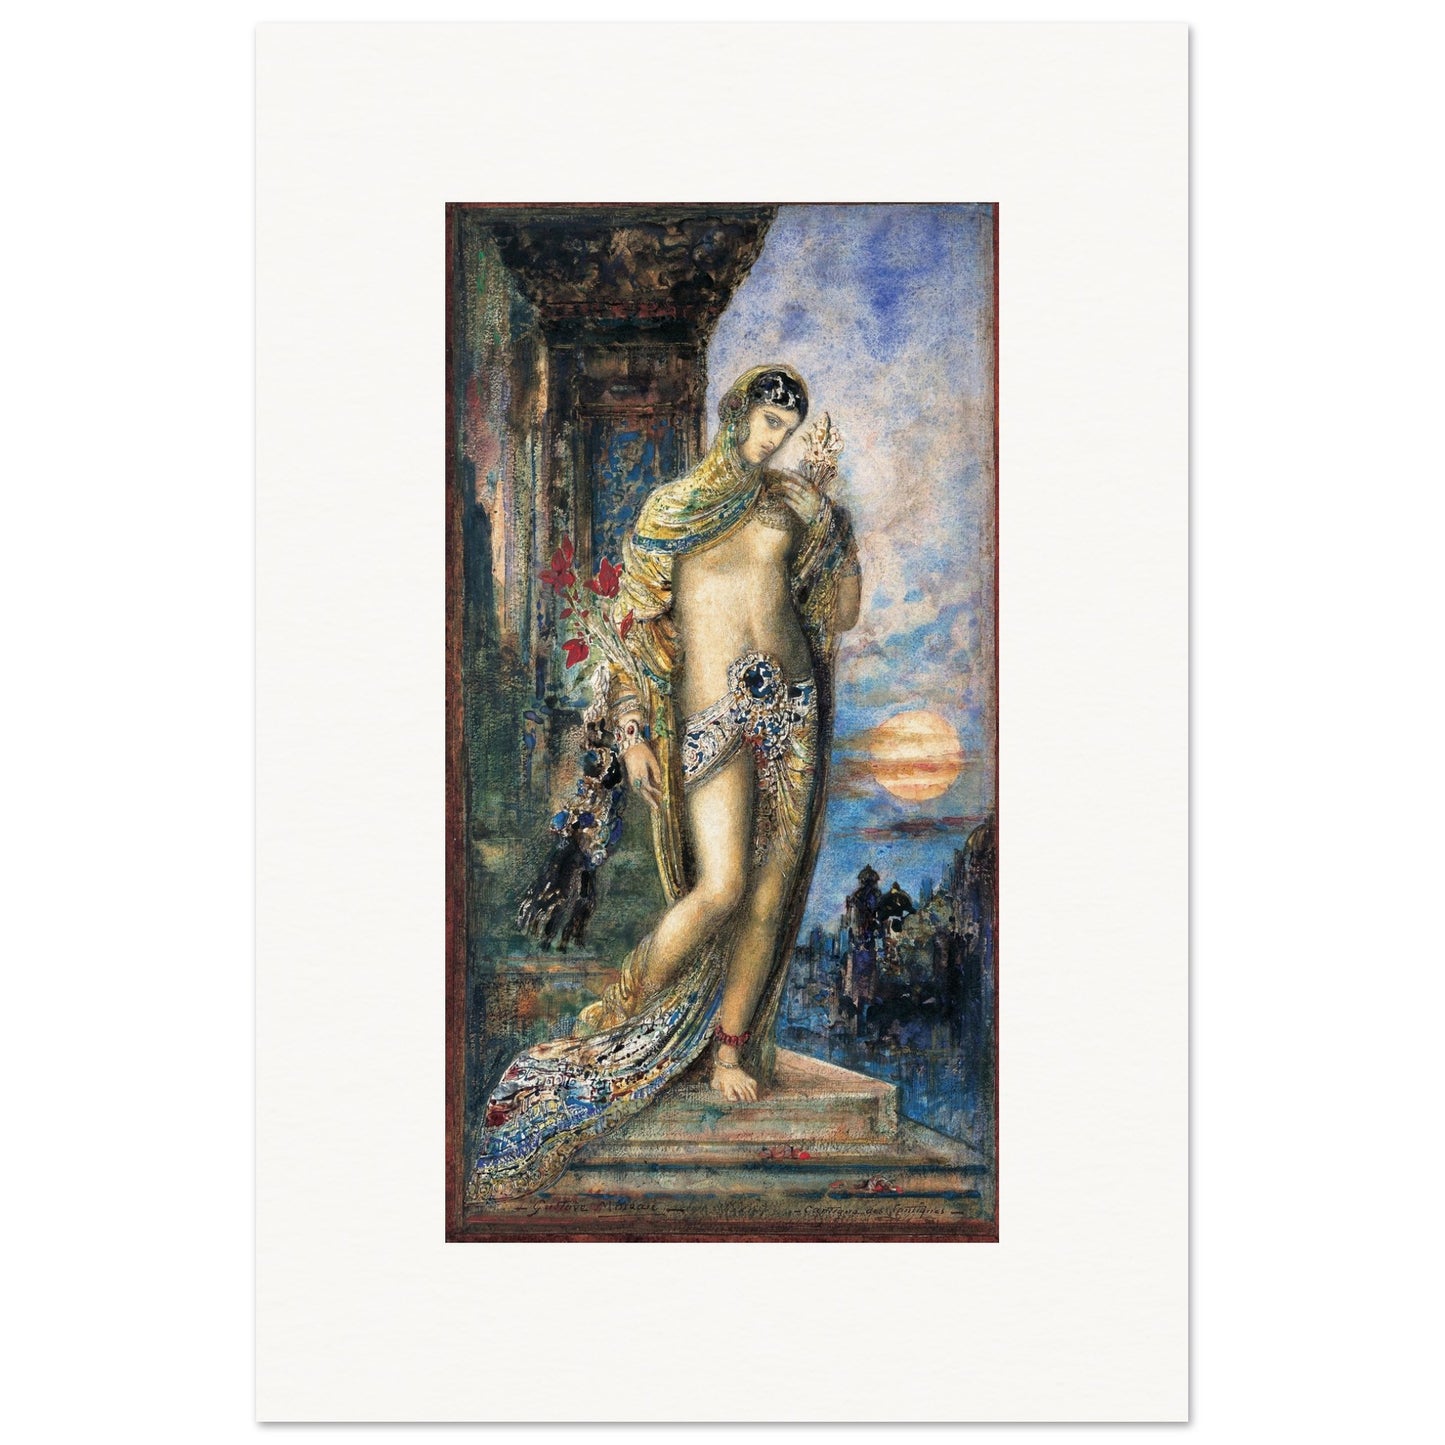 GUSTAVE MOREAU - SONG OF SONGS - MUSEUM QUALITY MATTE POSTER 